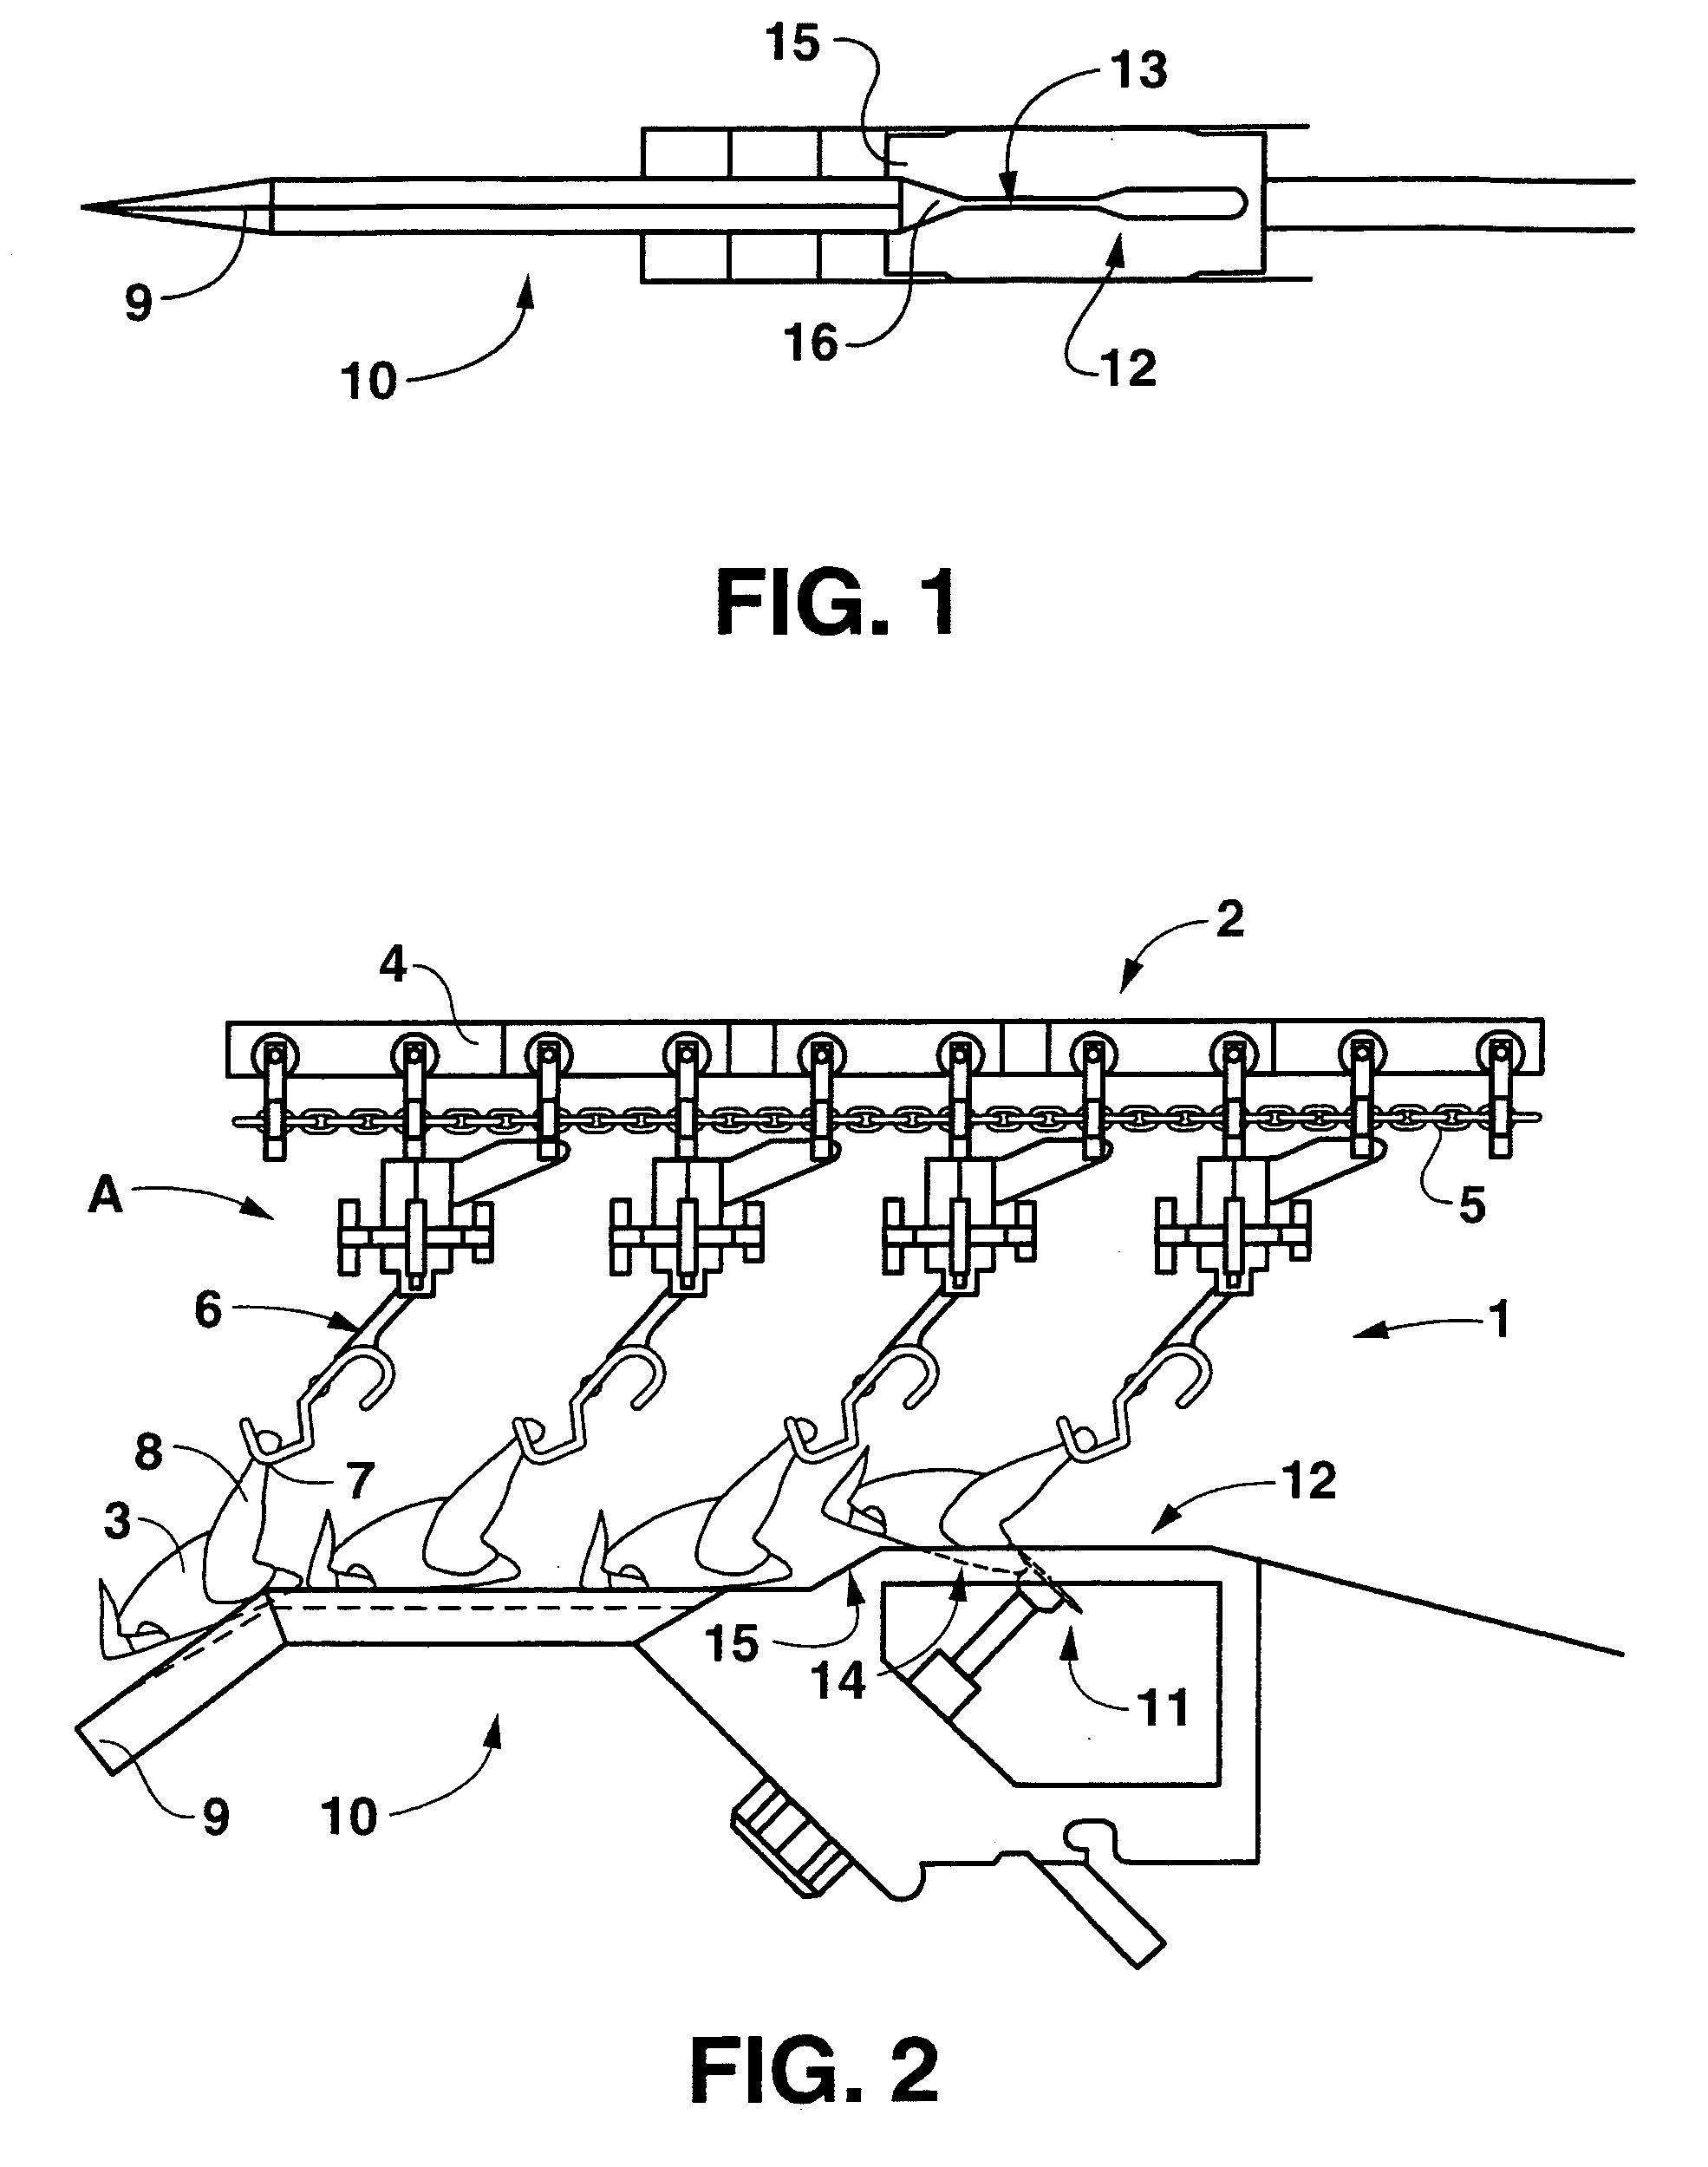 Apparatus for automatically removing a tail from poultry